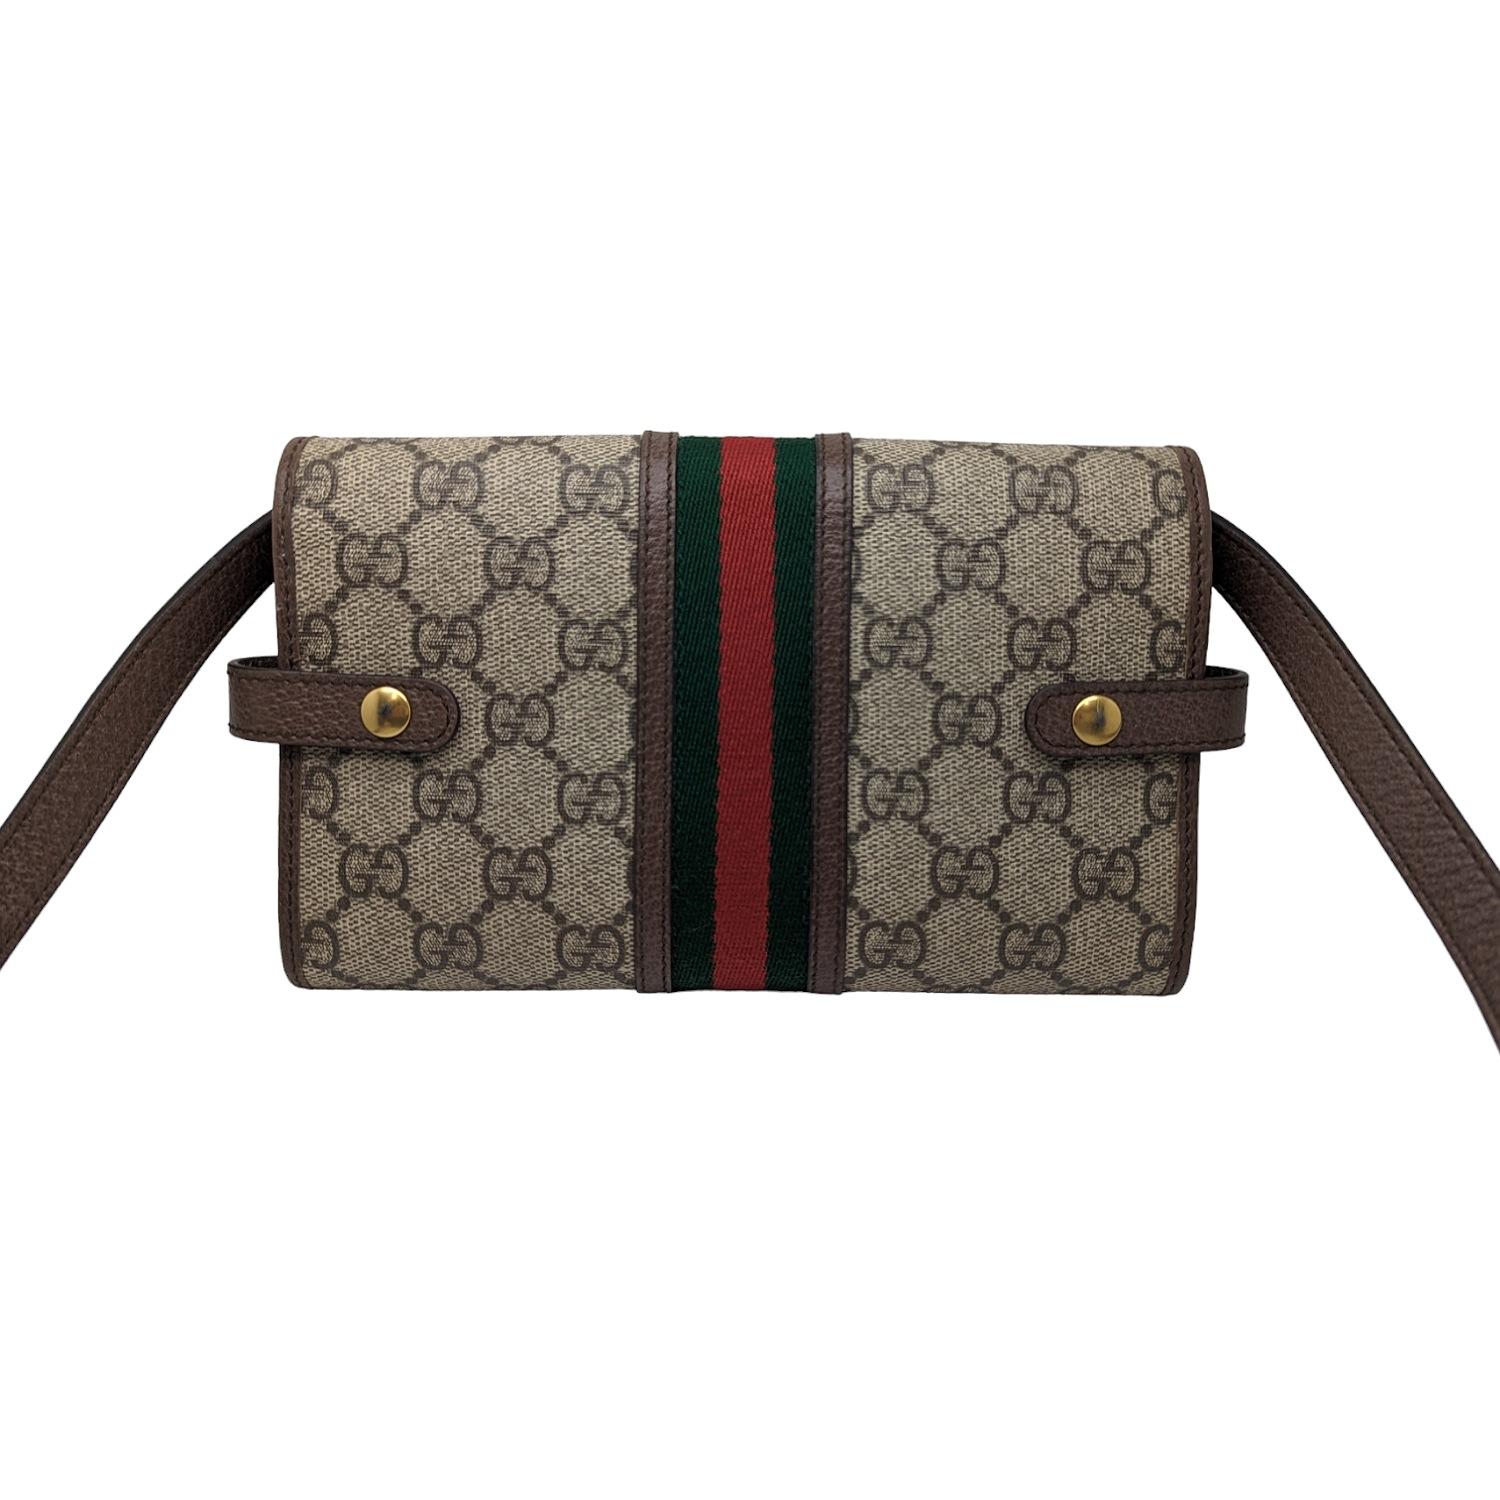 This stylish crossbody is crafted of Gucci GG monogram coated canvas with a green and red web stripe and brown leather trim. This wallet features a snap button closure in aged gold and an optional shoulder strap. The flap opens to a brown leather